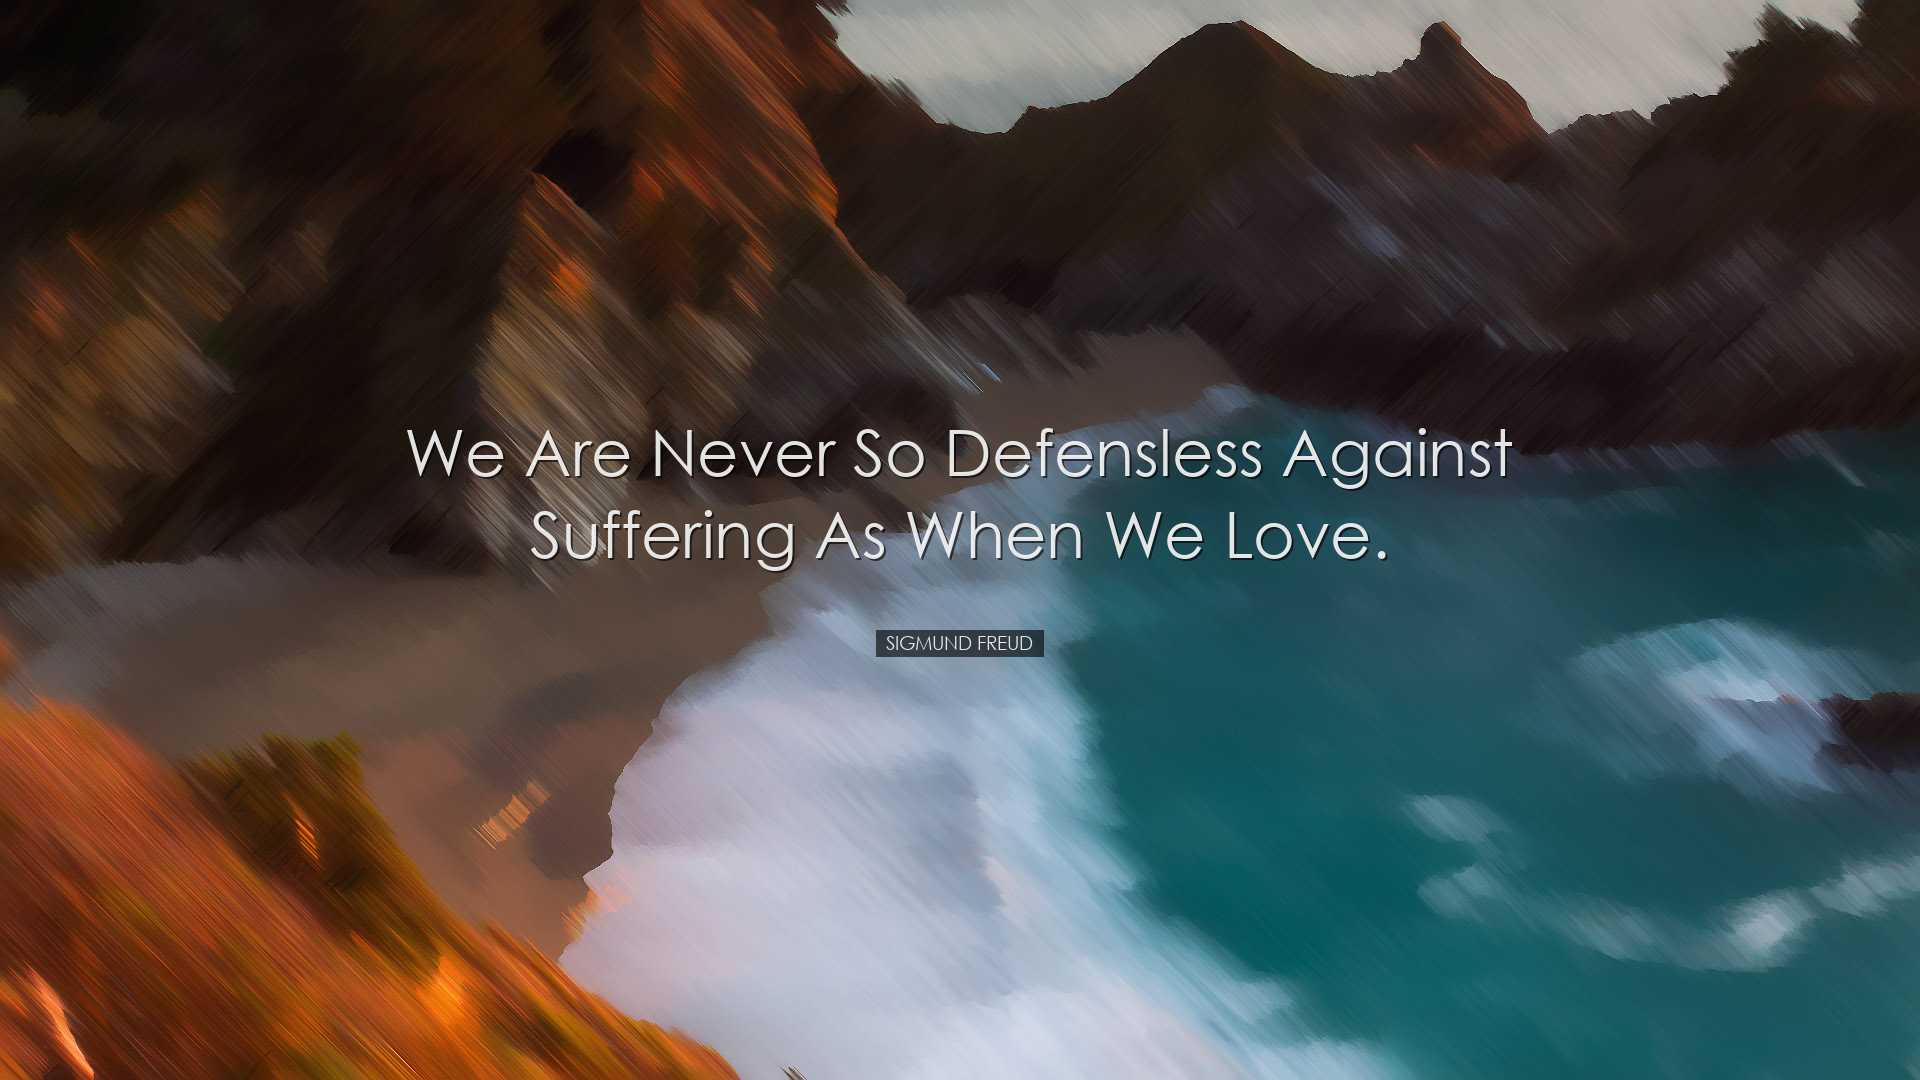 We are never so defensless against suffering as when we love. - Si